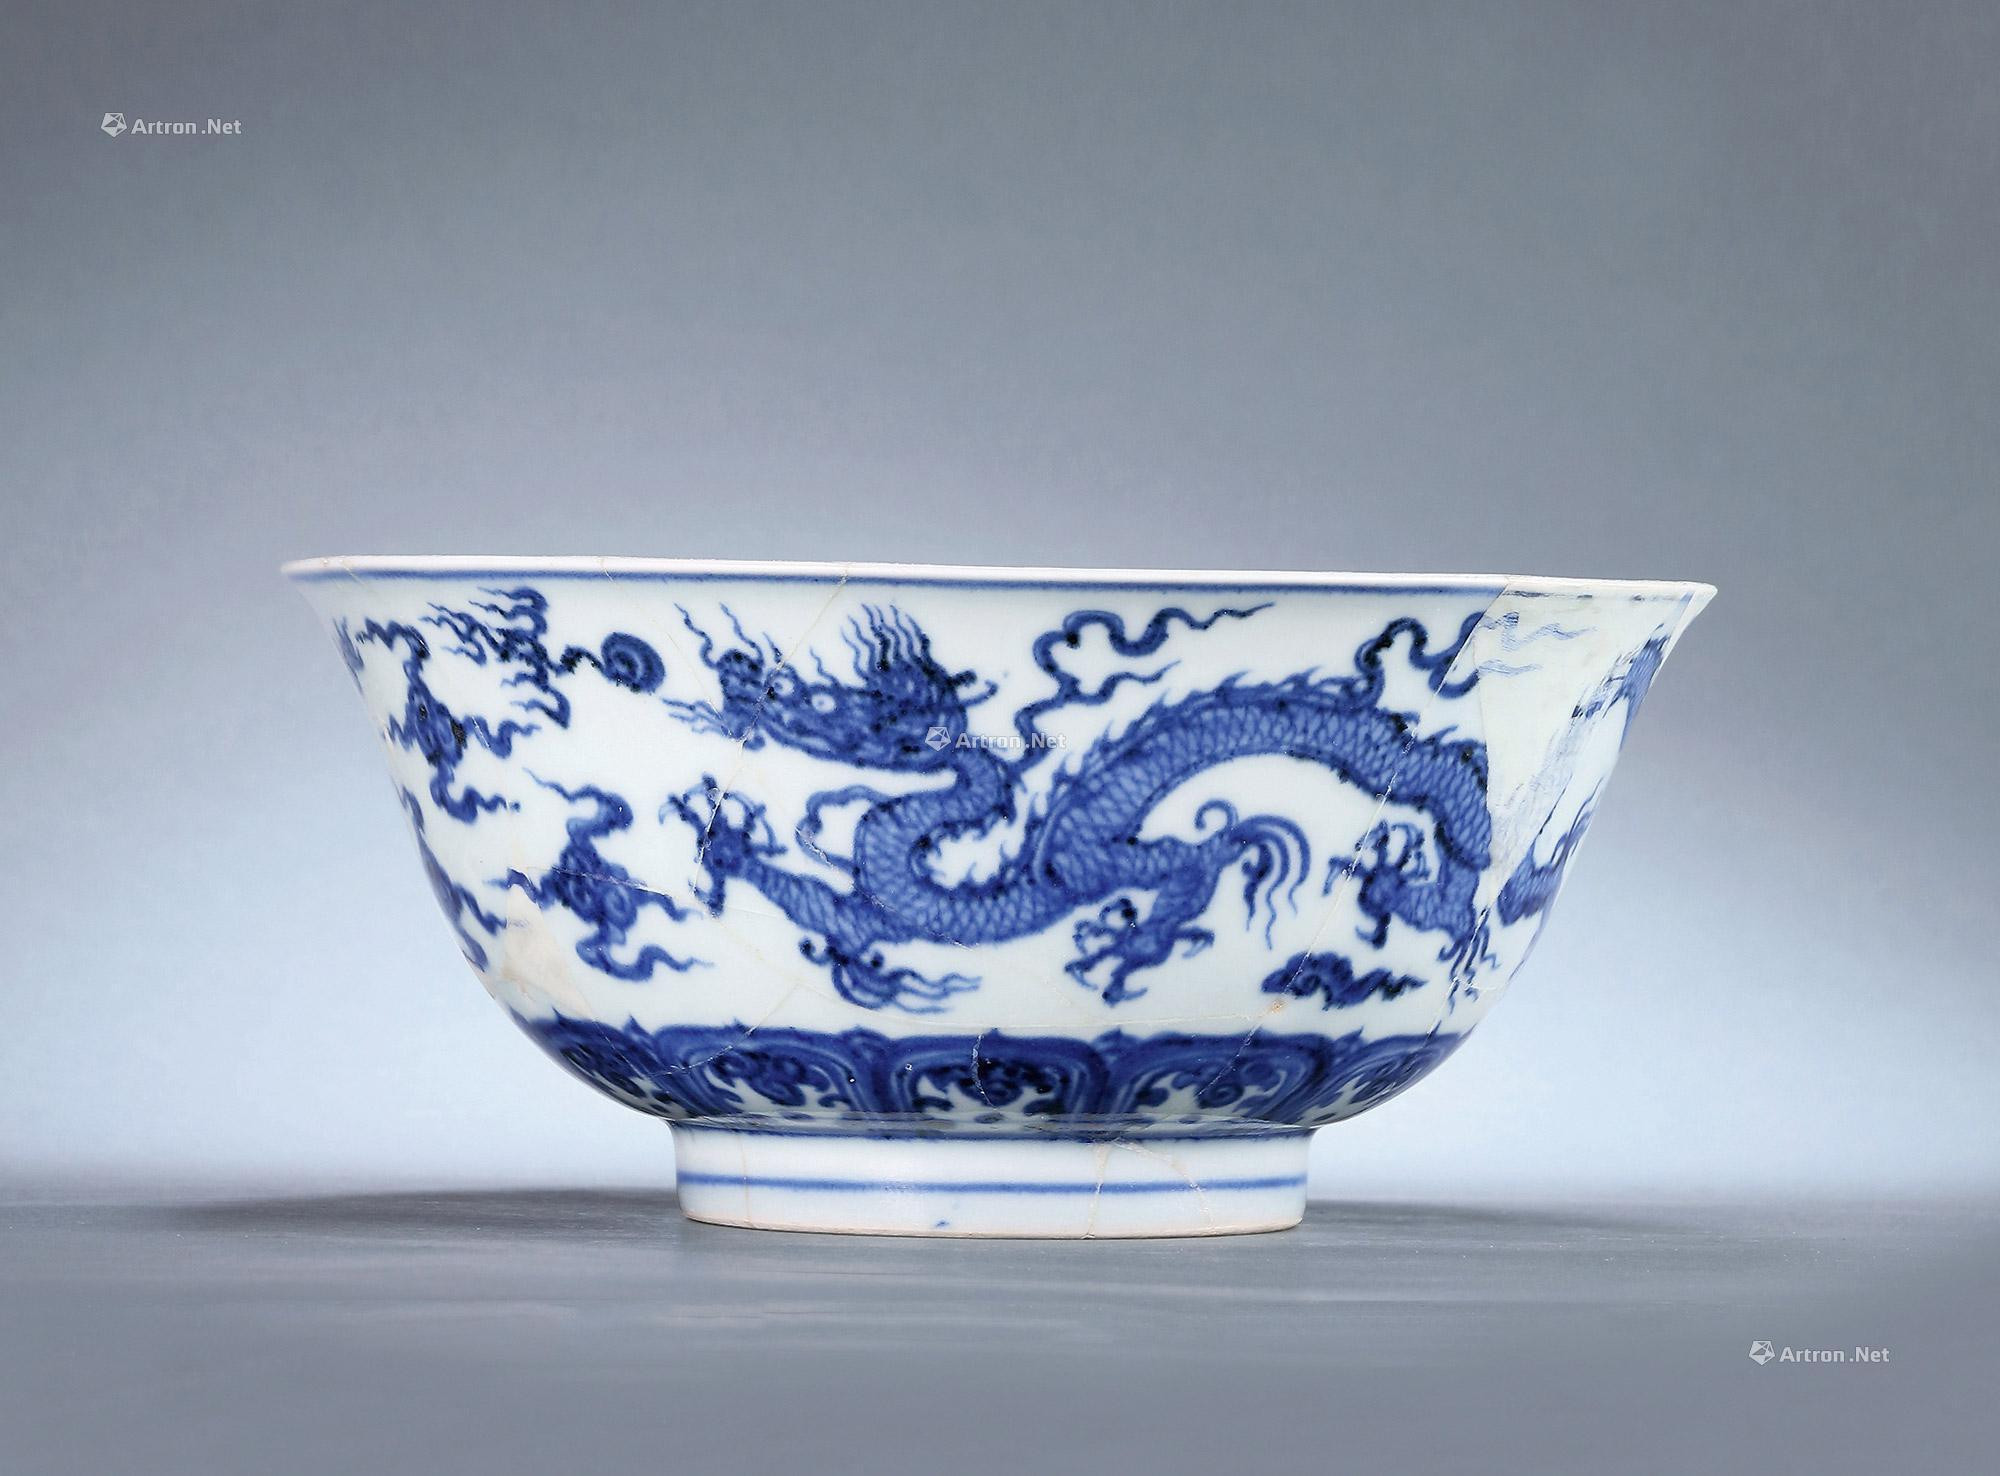 A BLUE AND WHITE BOWL WITH ENGRAVED CLOUD DESIGN